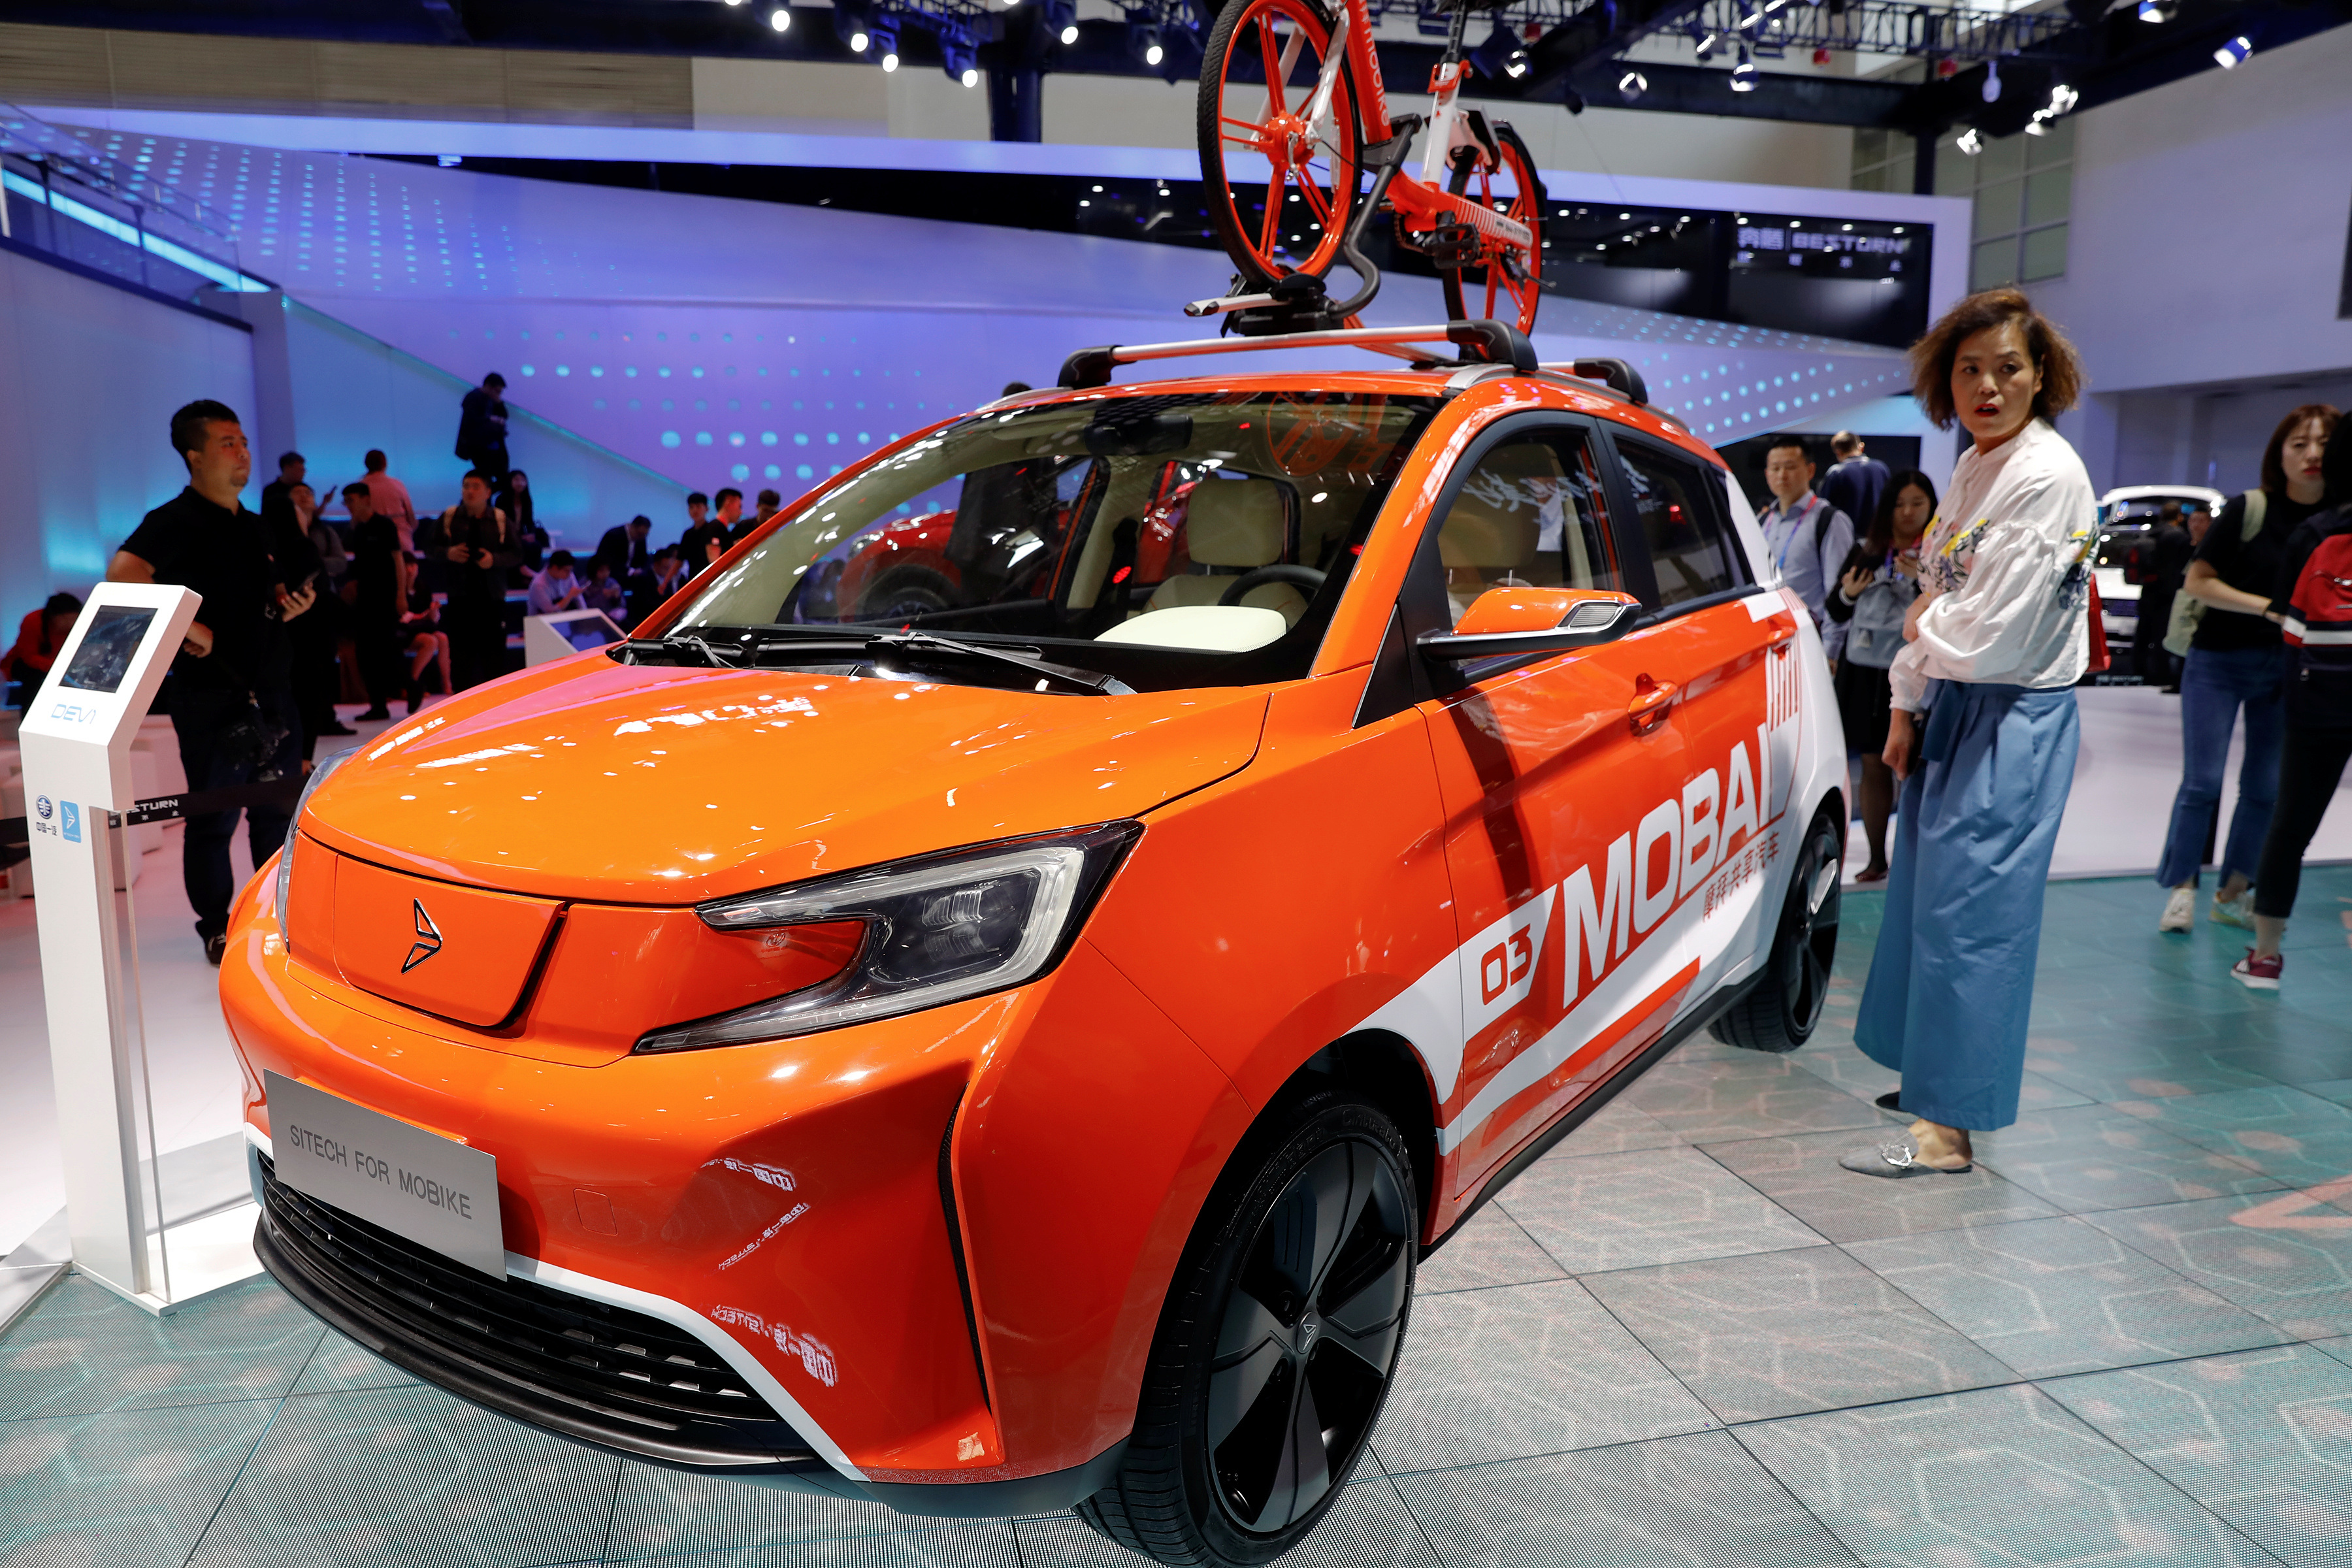 People gather around the Sitech DEV1 from FAW Group during a media preview of the Auto China 2018 motor show in Beijing